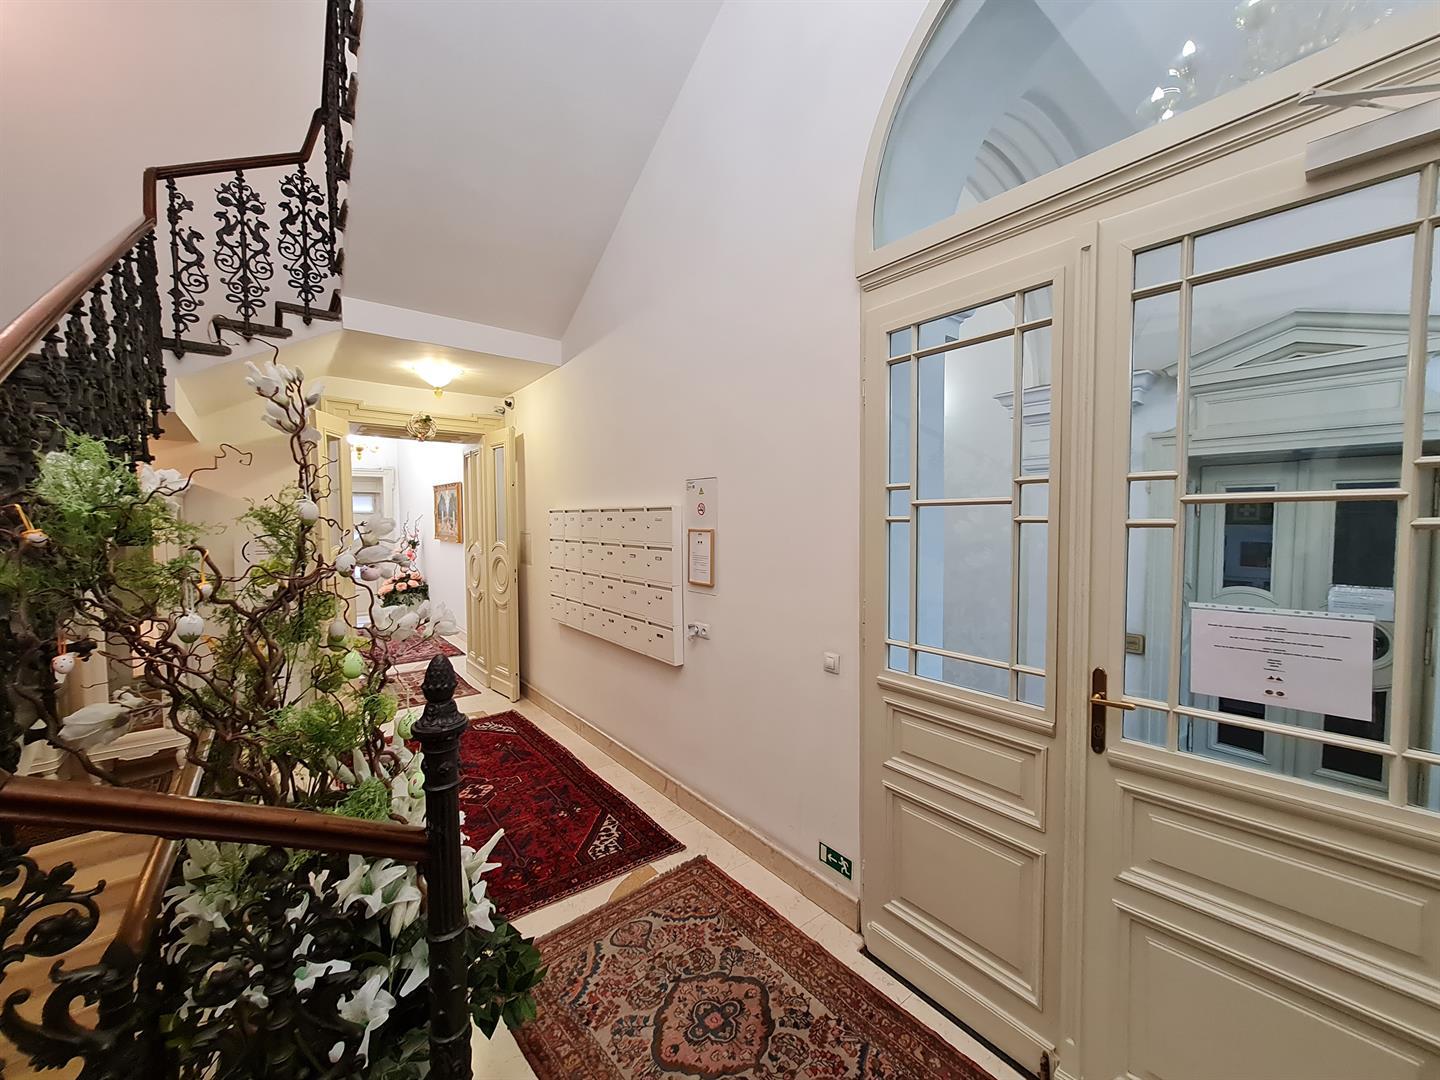 Rent of a luxury residential apartment 3+Kk, 94m2 with a balcony and swimming pool Prague 2